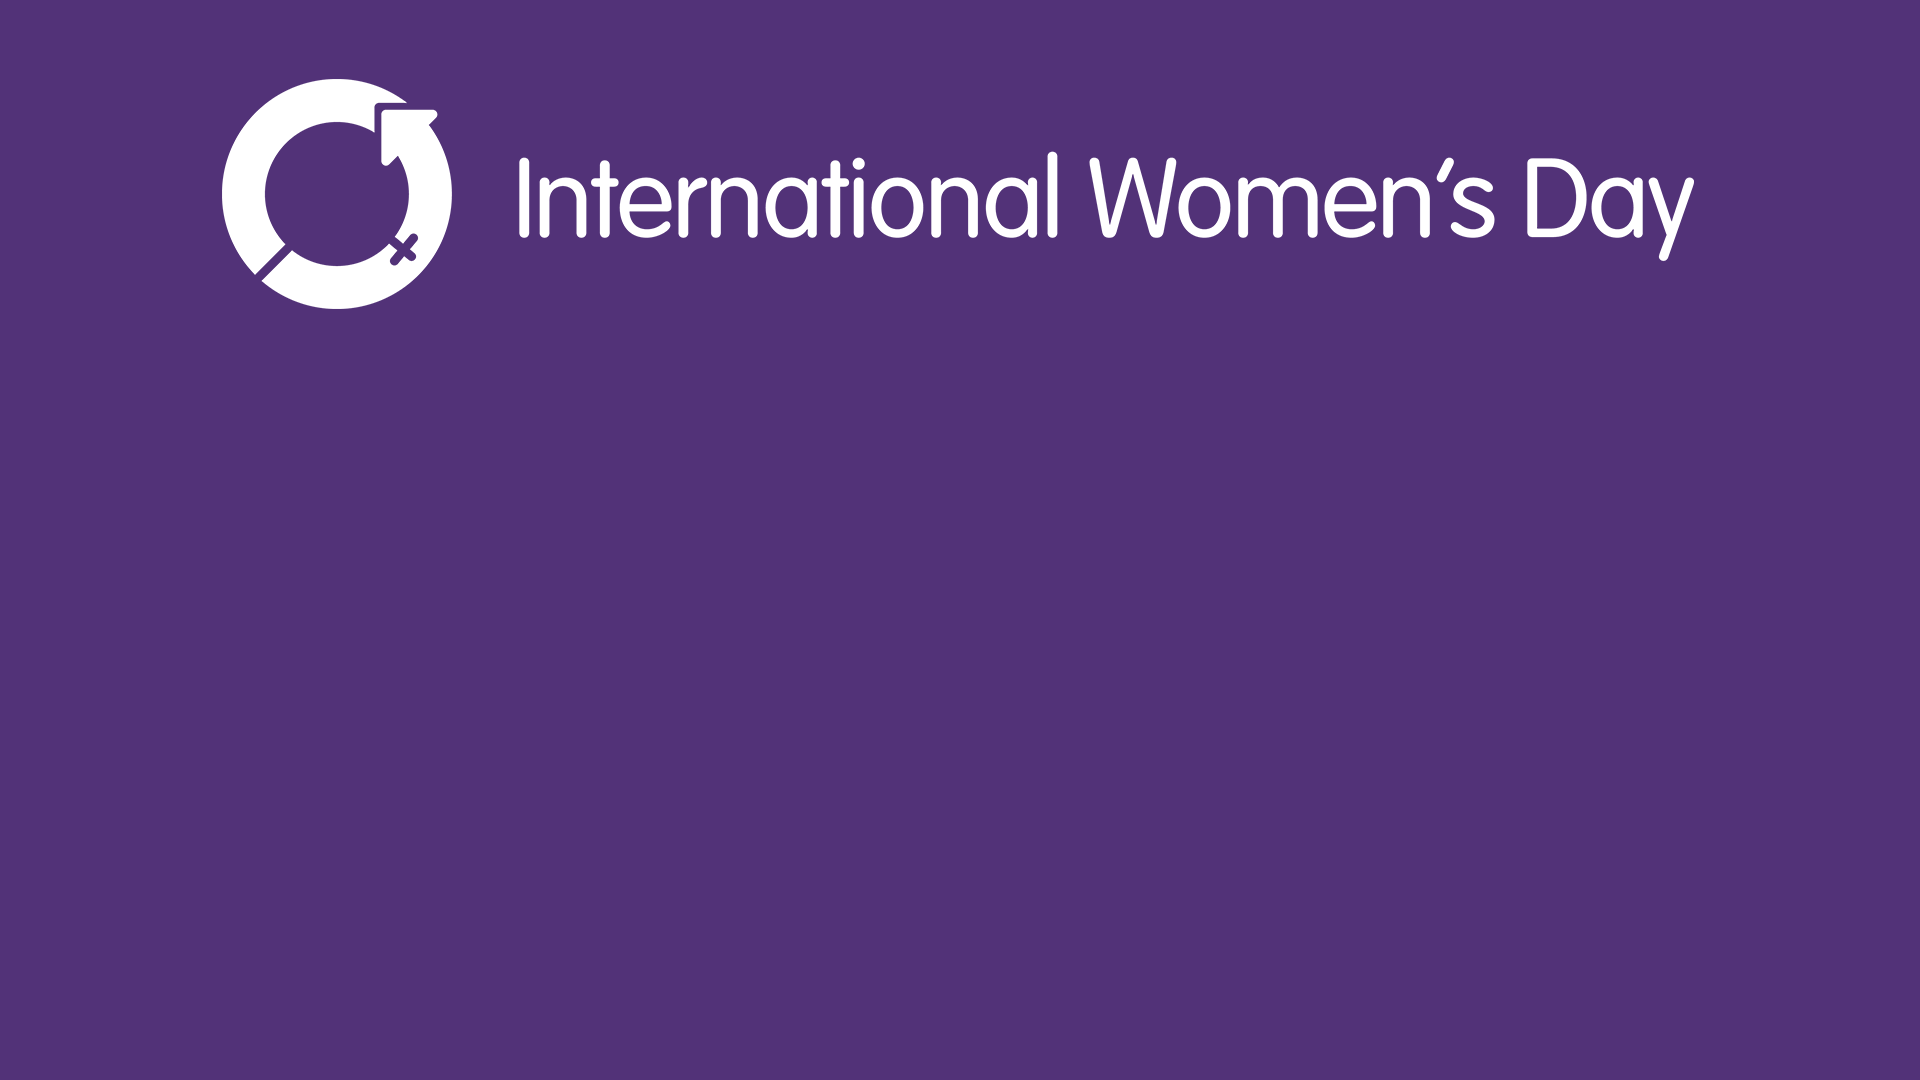 IWD: Download IWD Zoom background or create and share your own